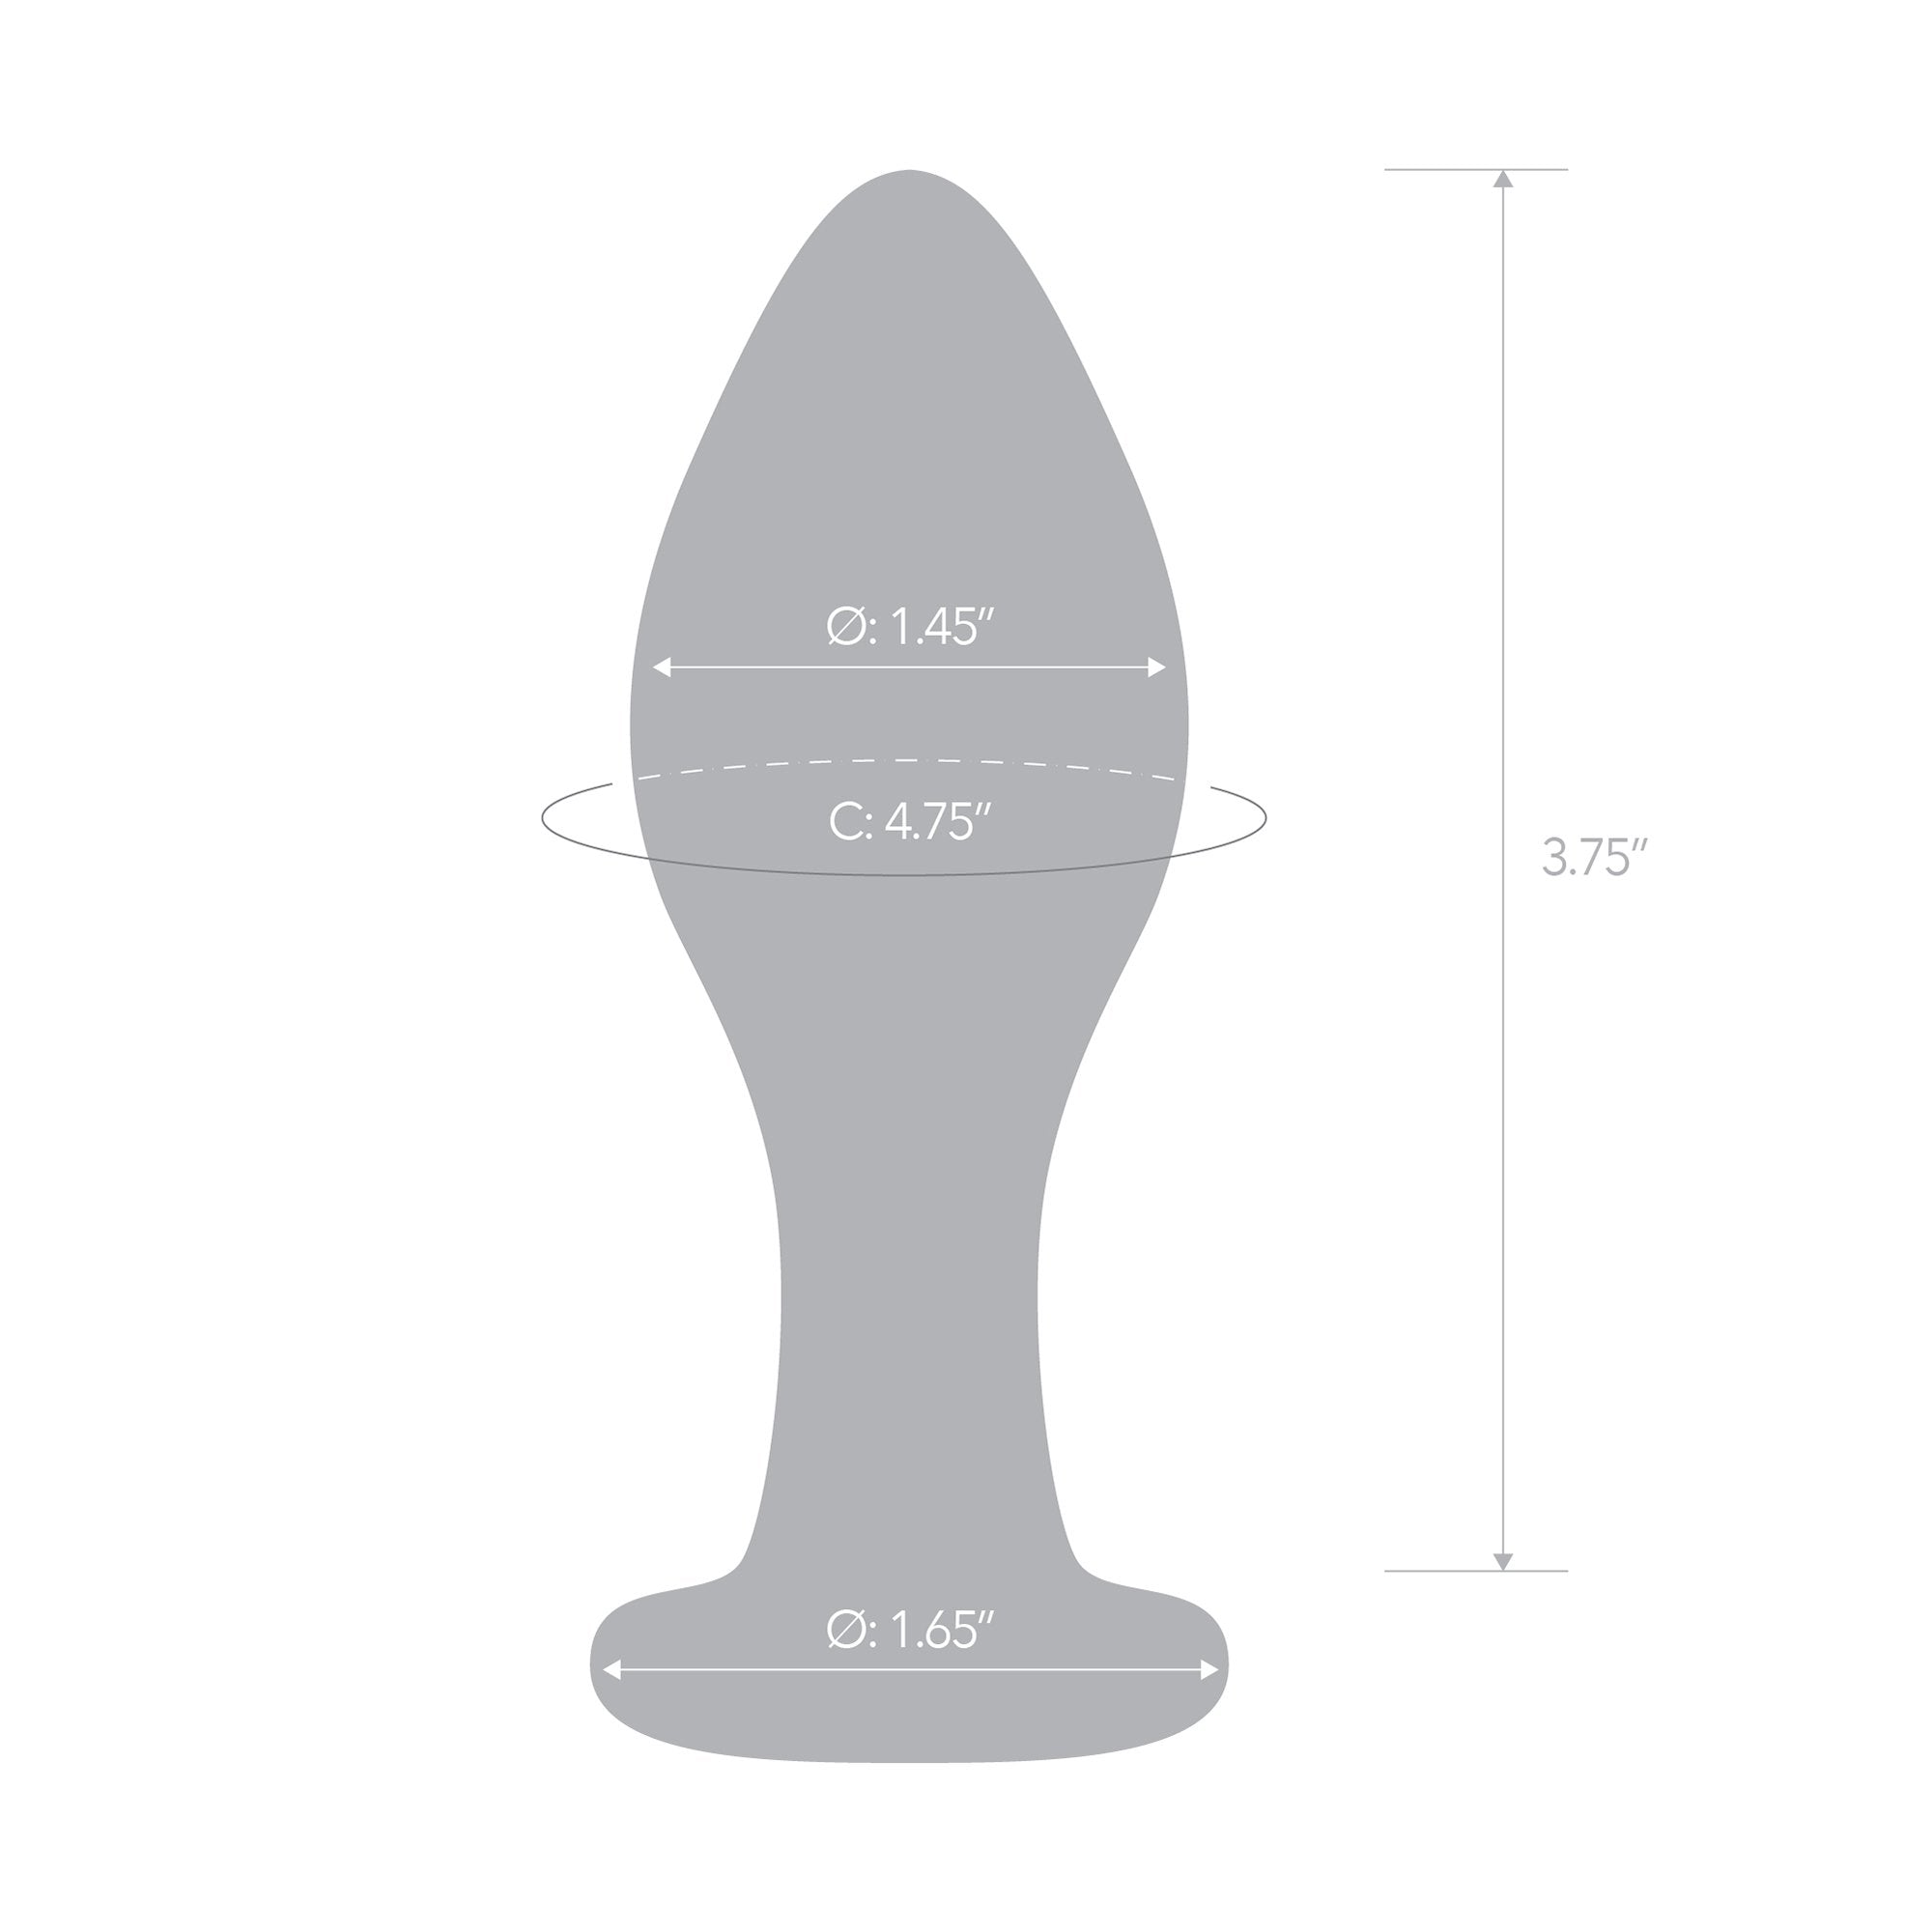 Specifications of the Gläs 4 inch Classic Butt Plug